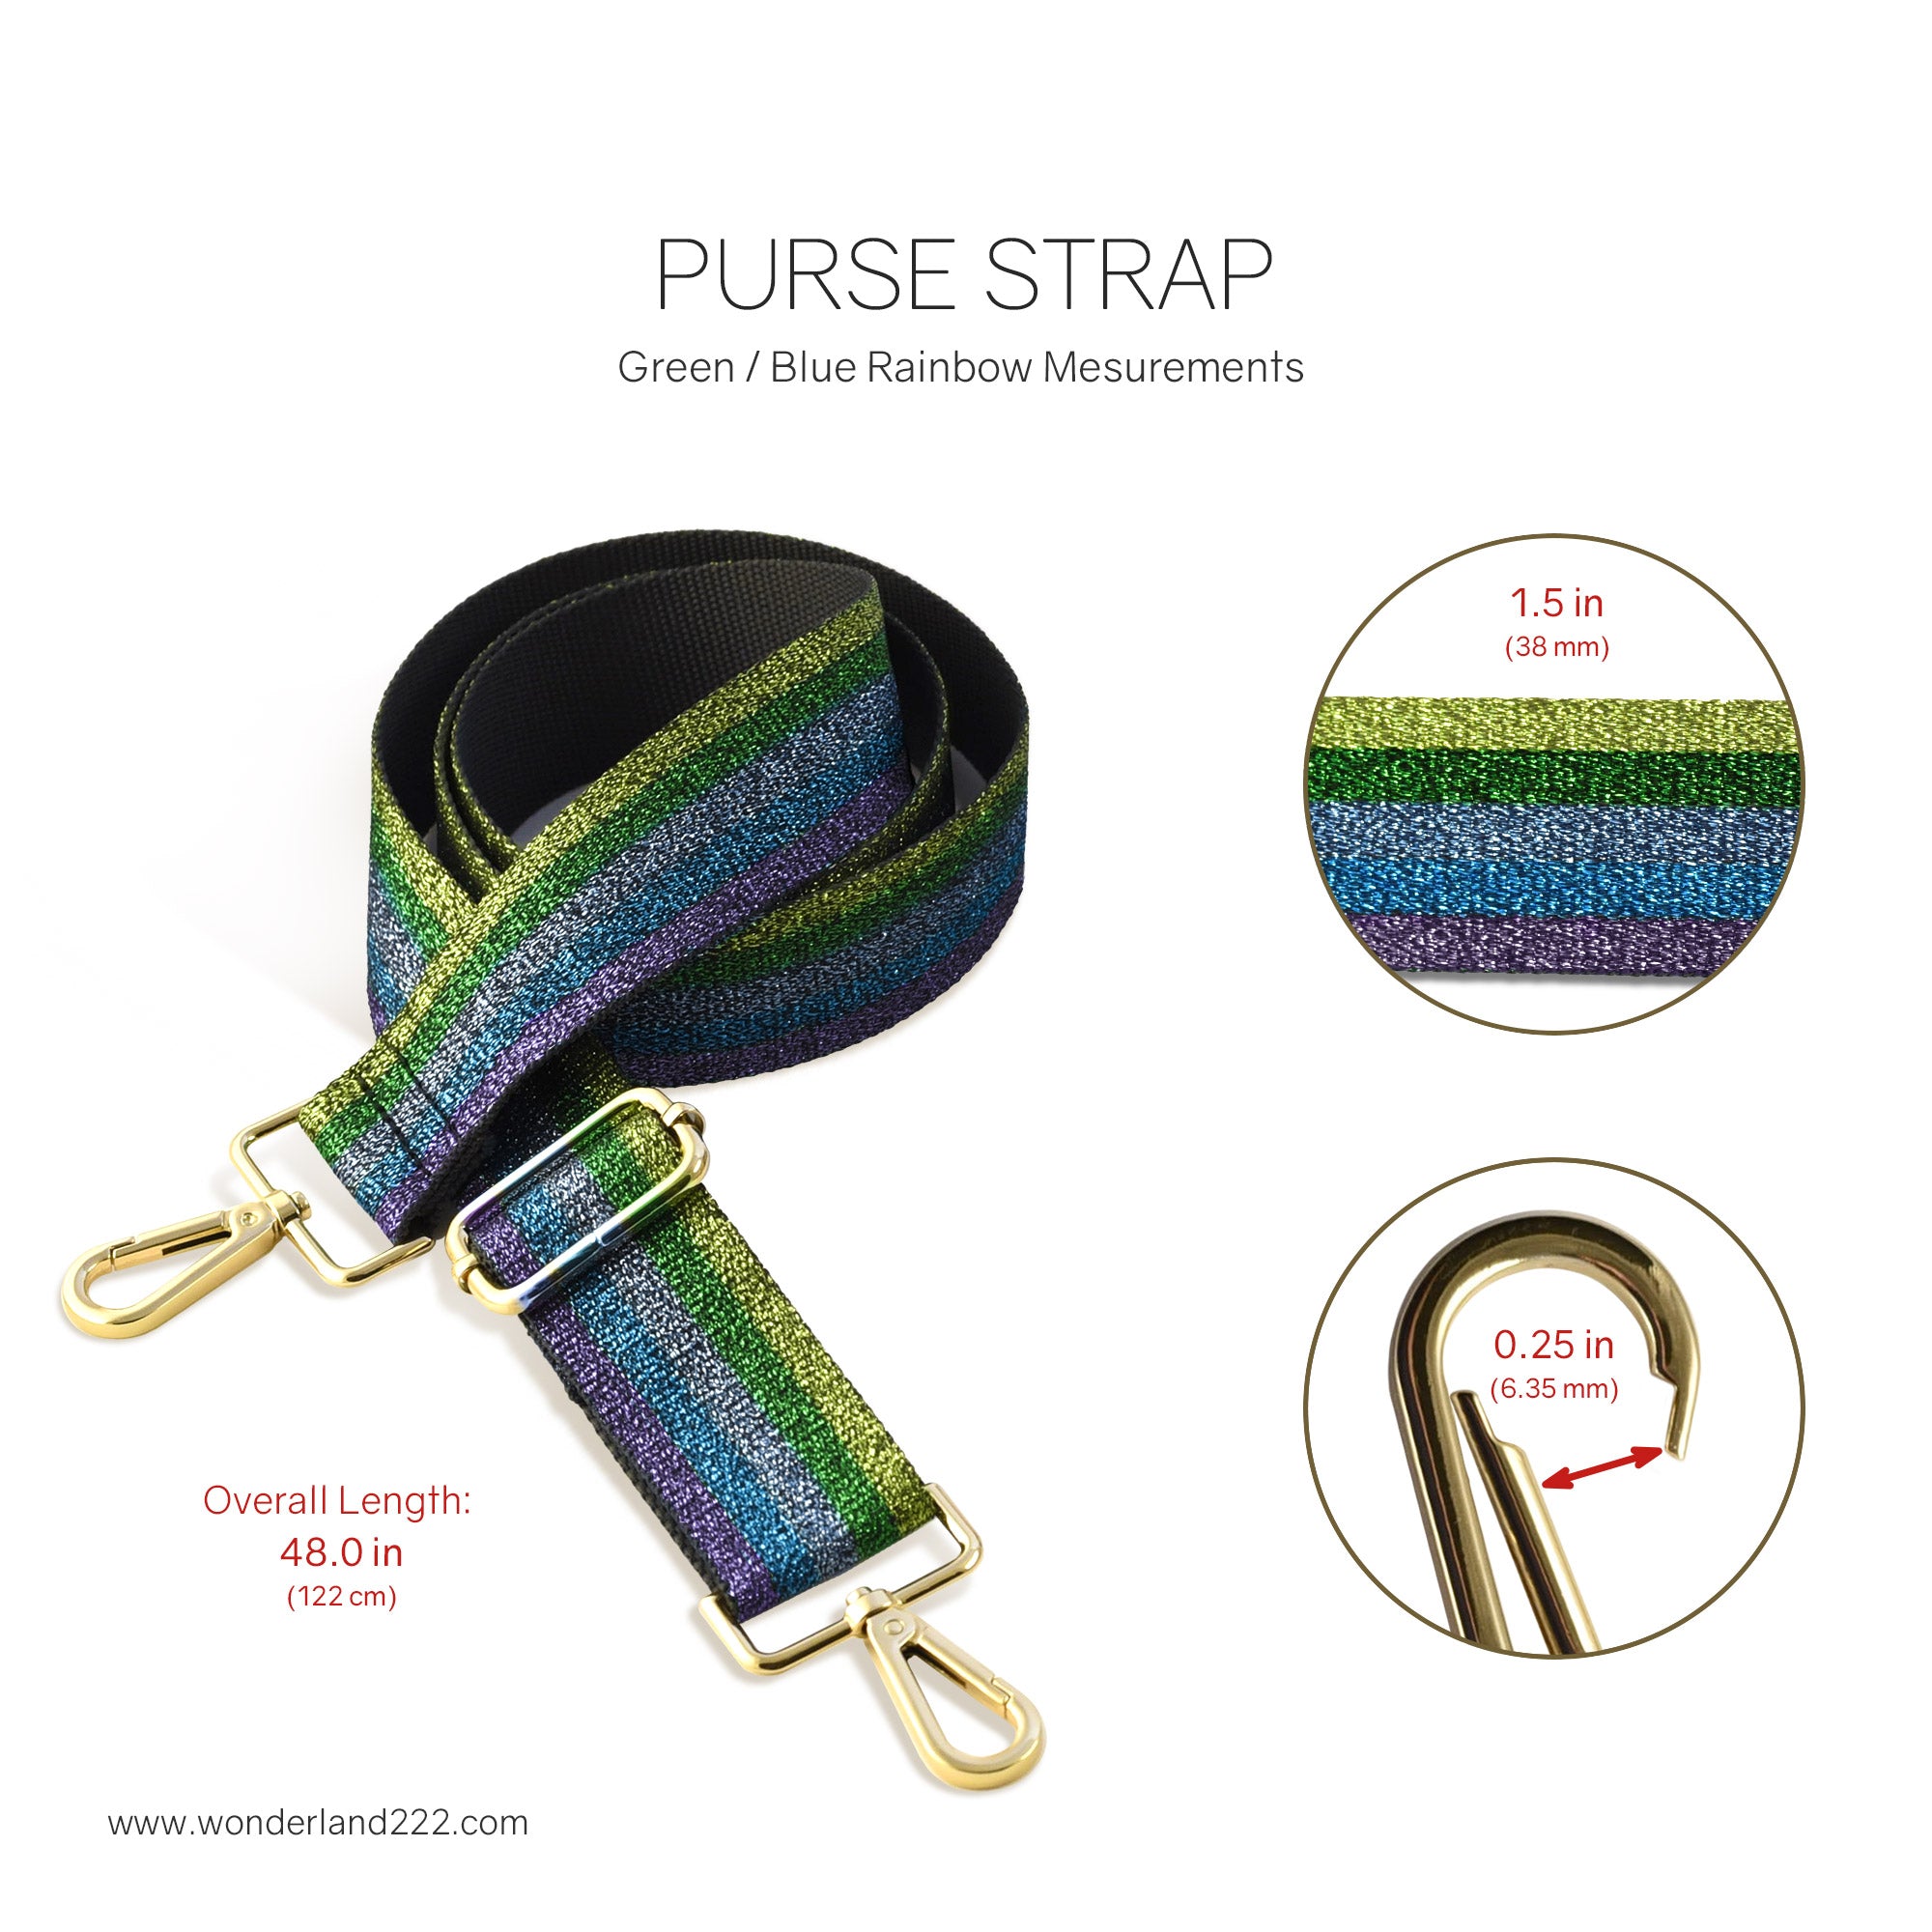 Replacement Purse Strap